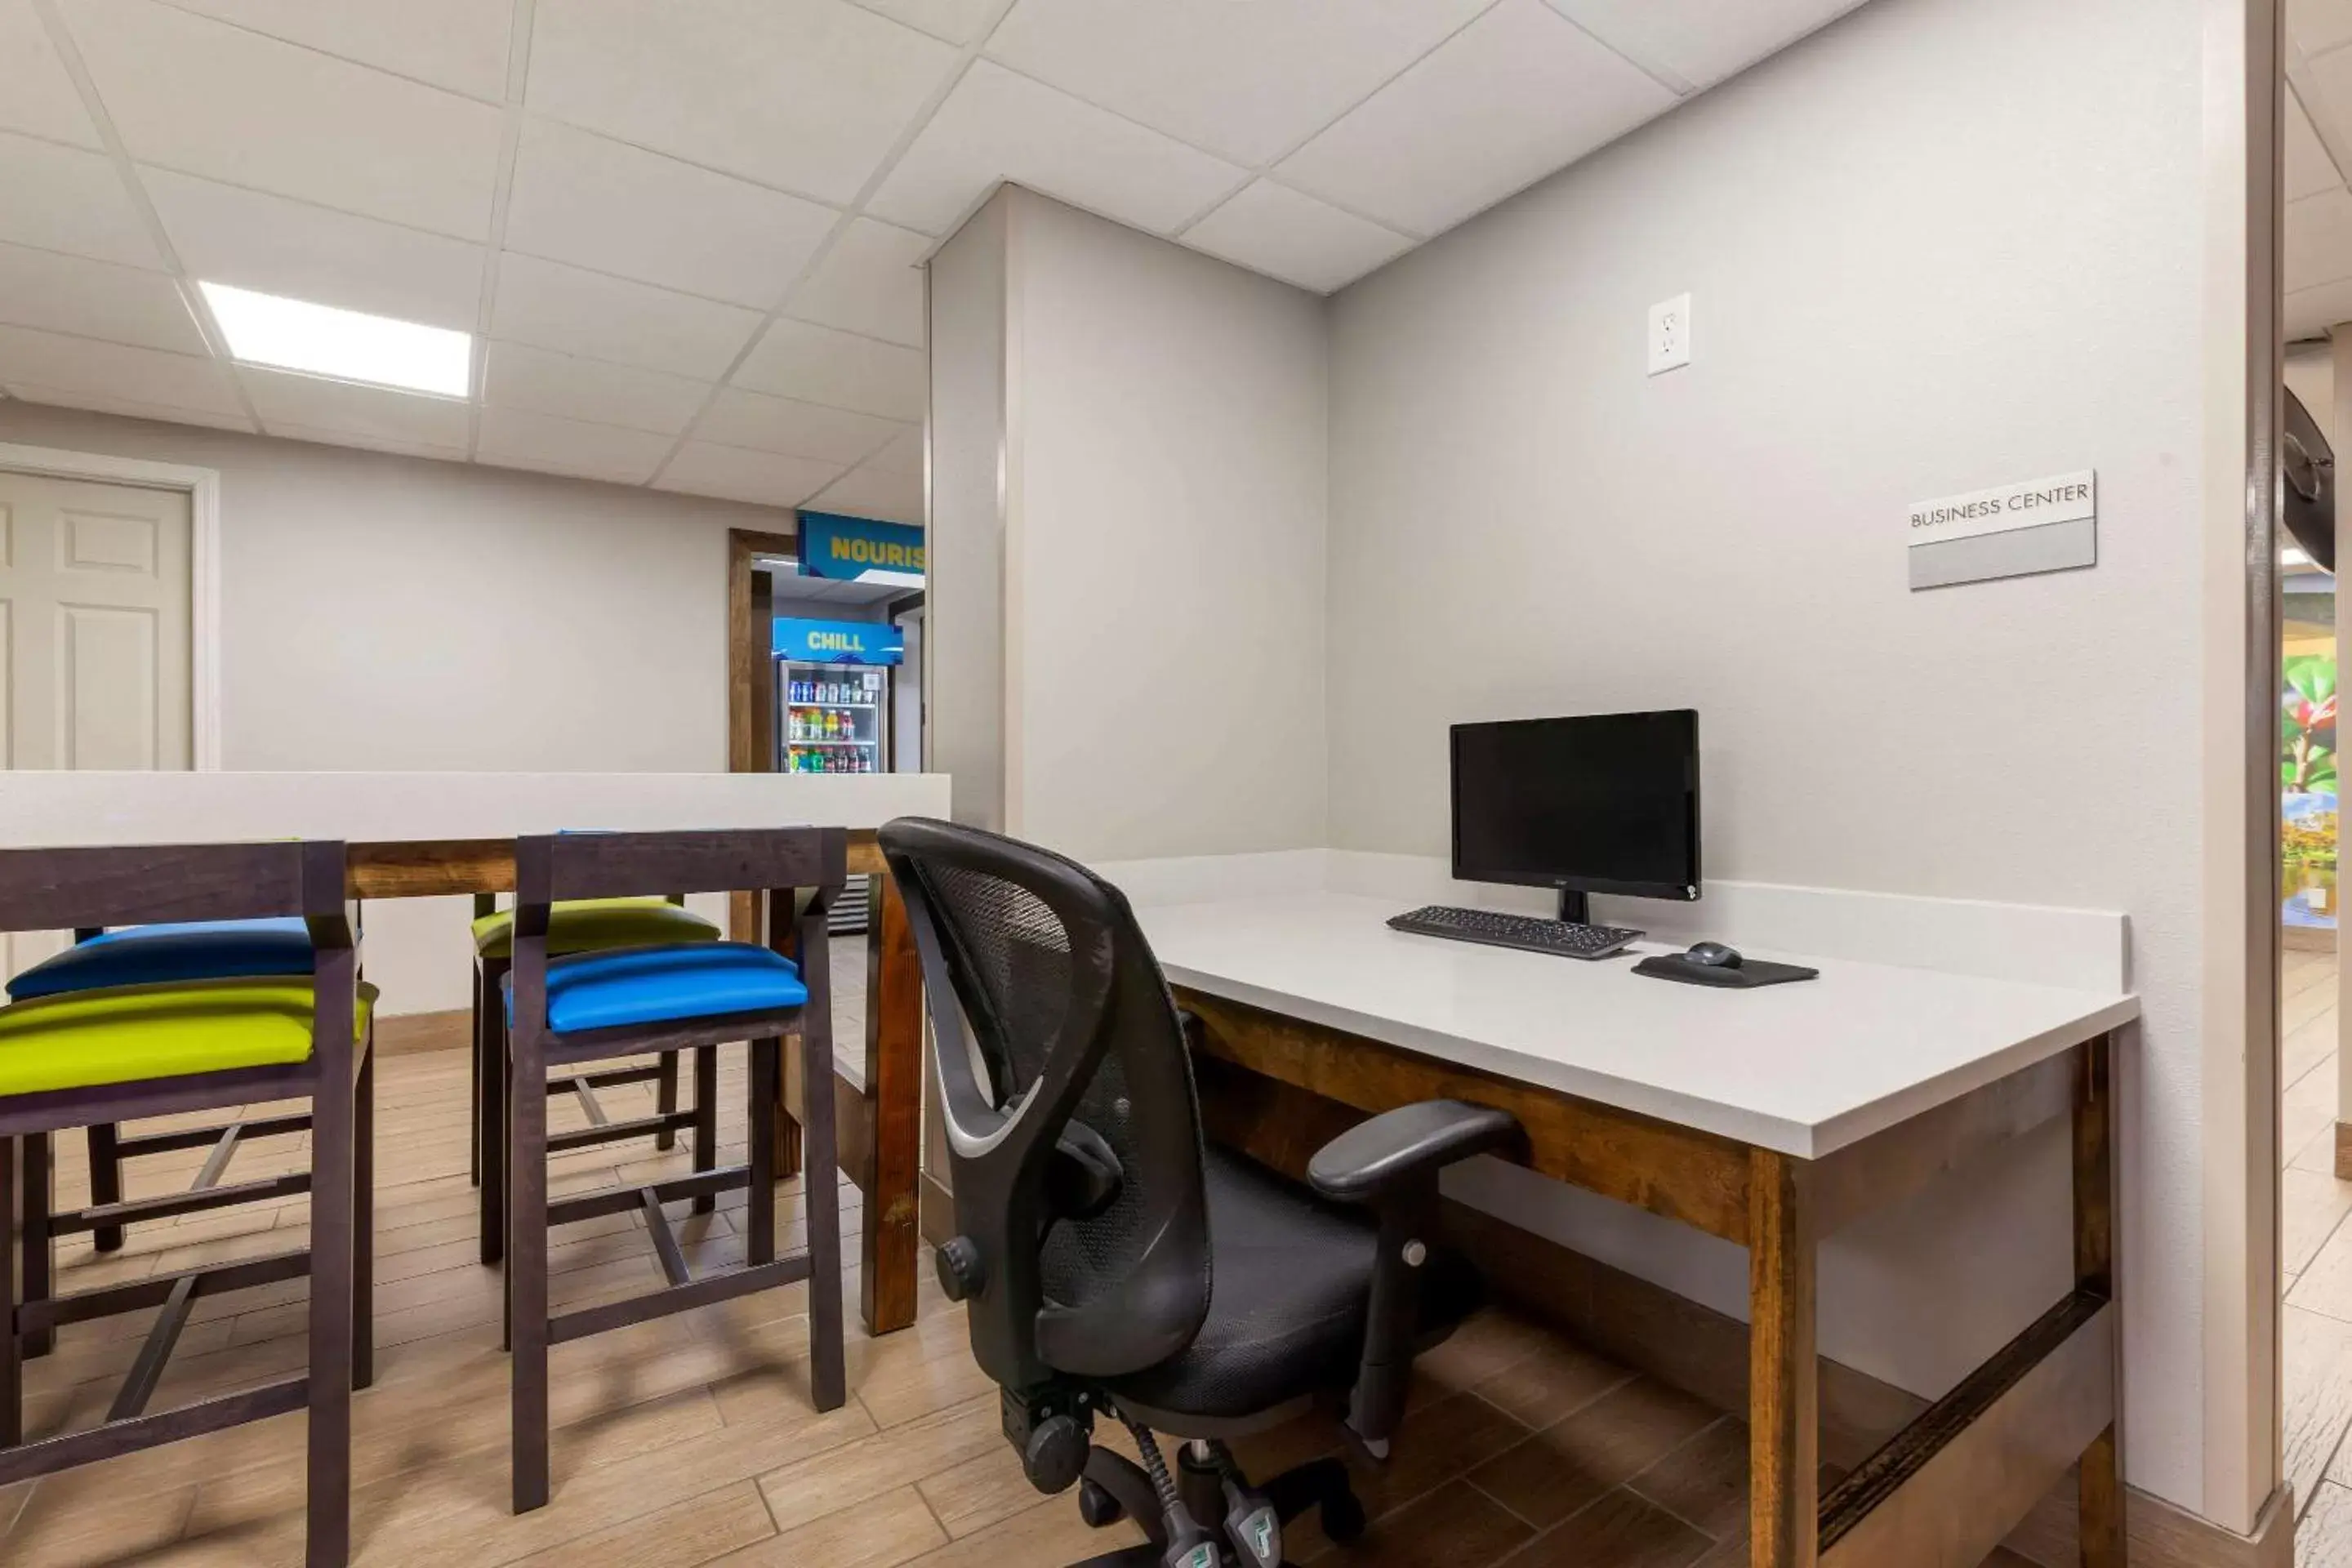 Business facilities in Clarion Pointe Tomah